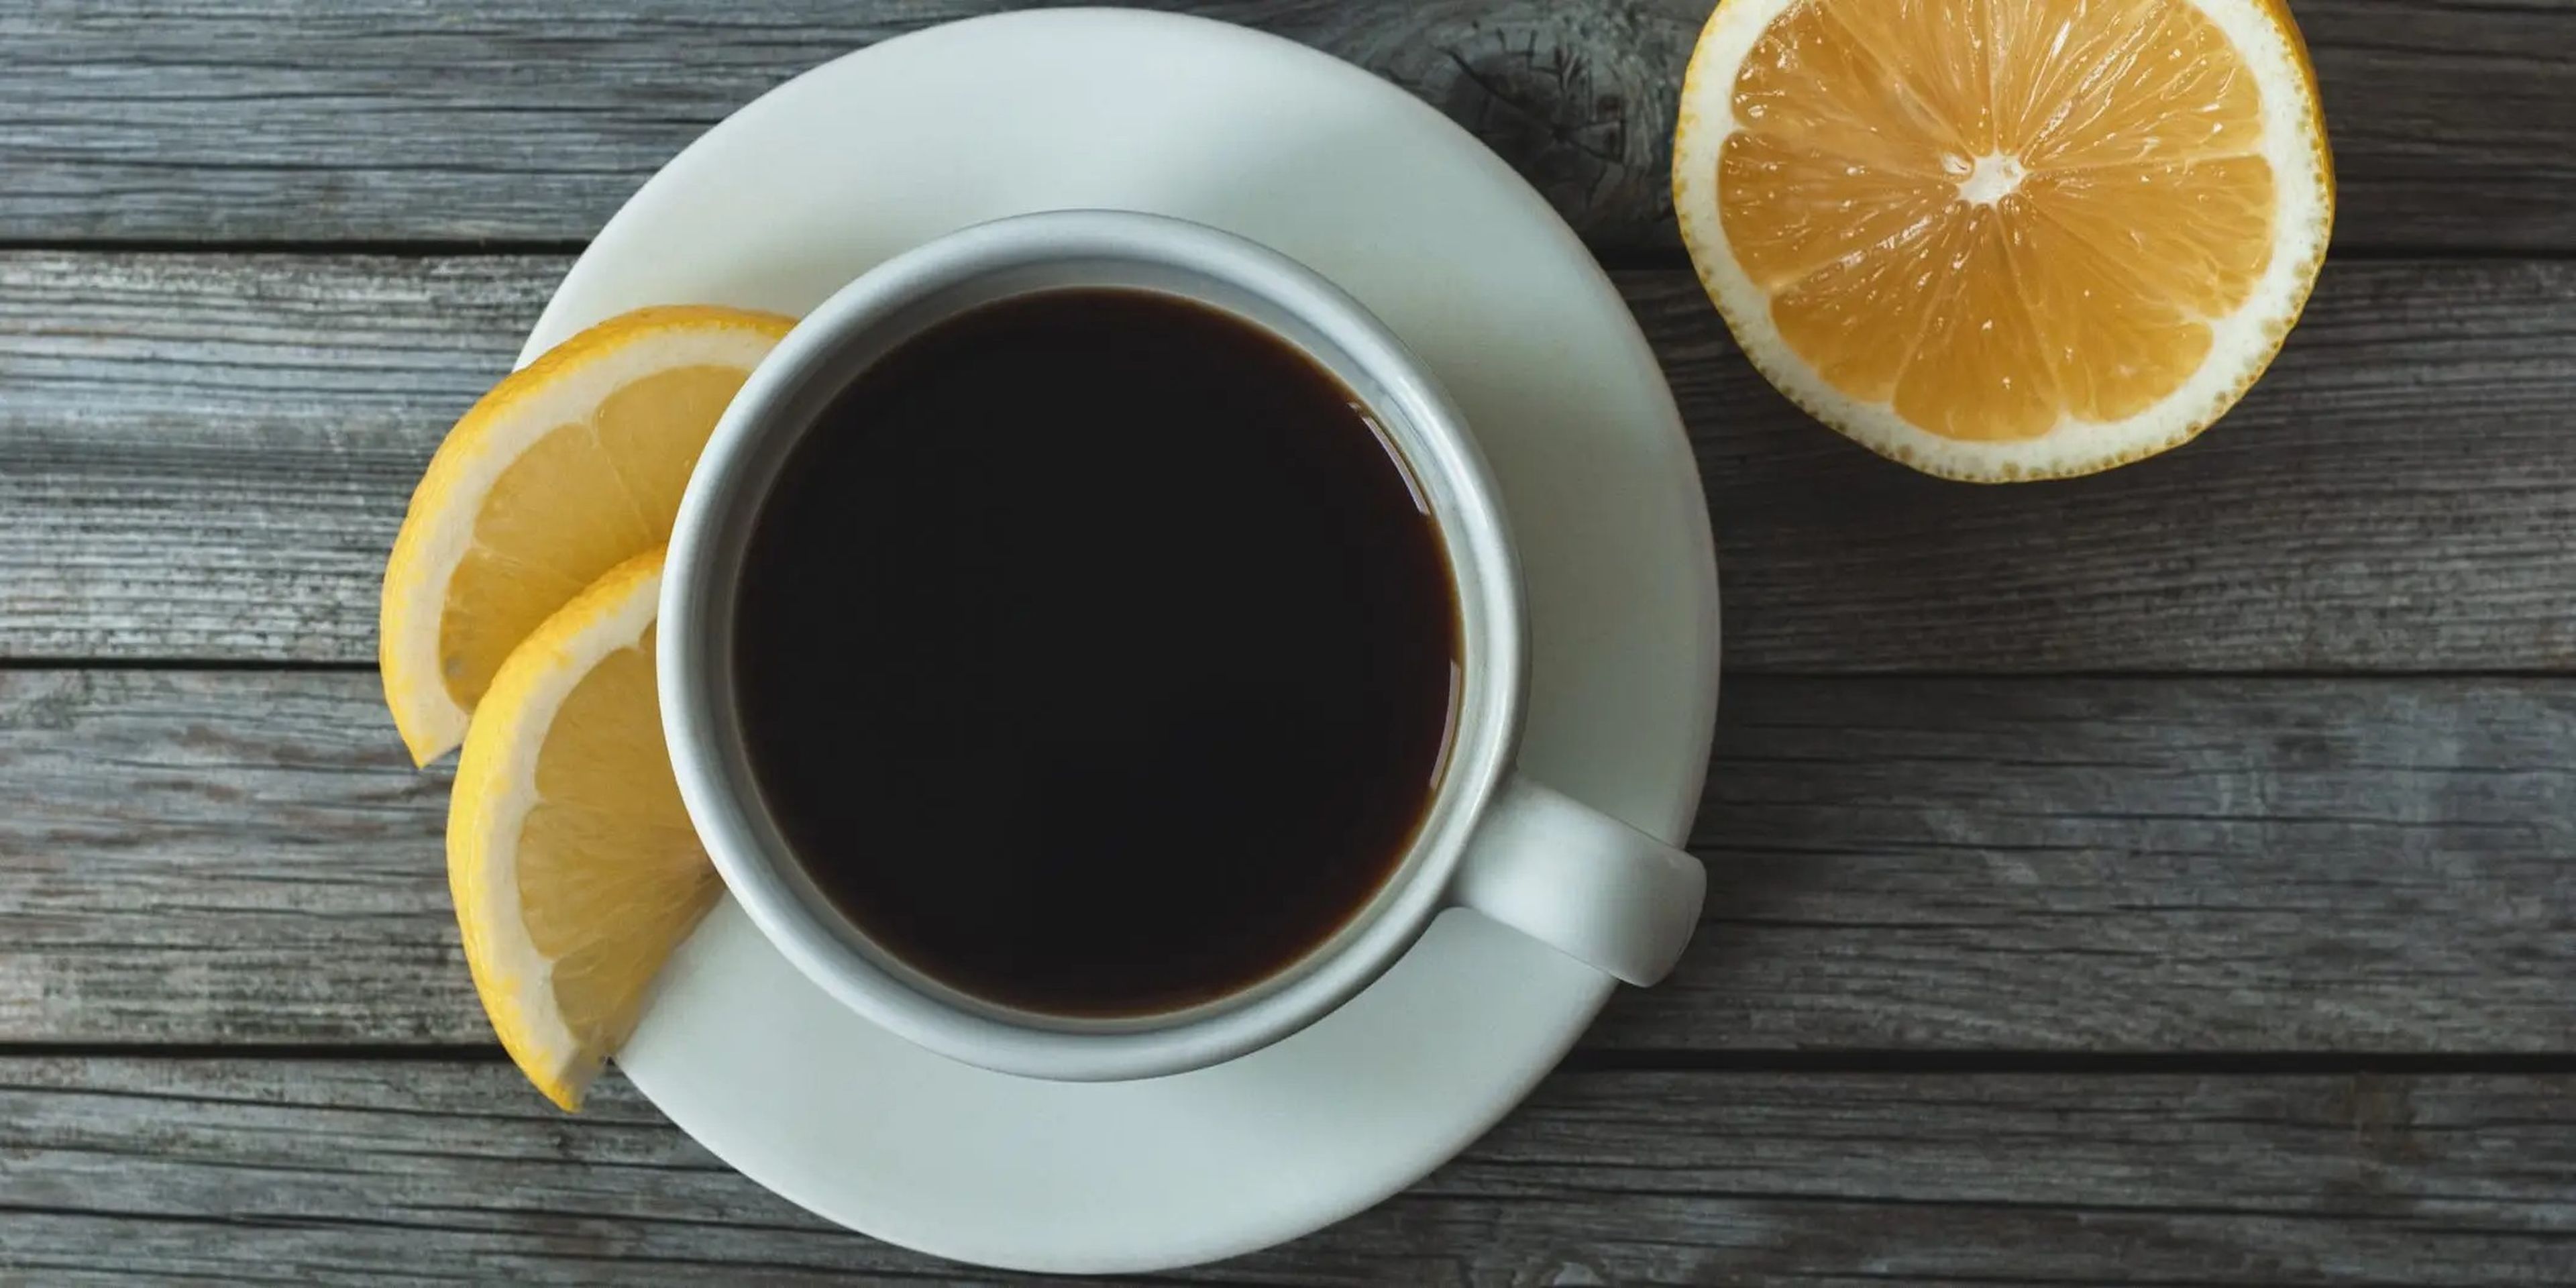 A cup of coffee set on a plate with slices of lemon surrounding it.